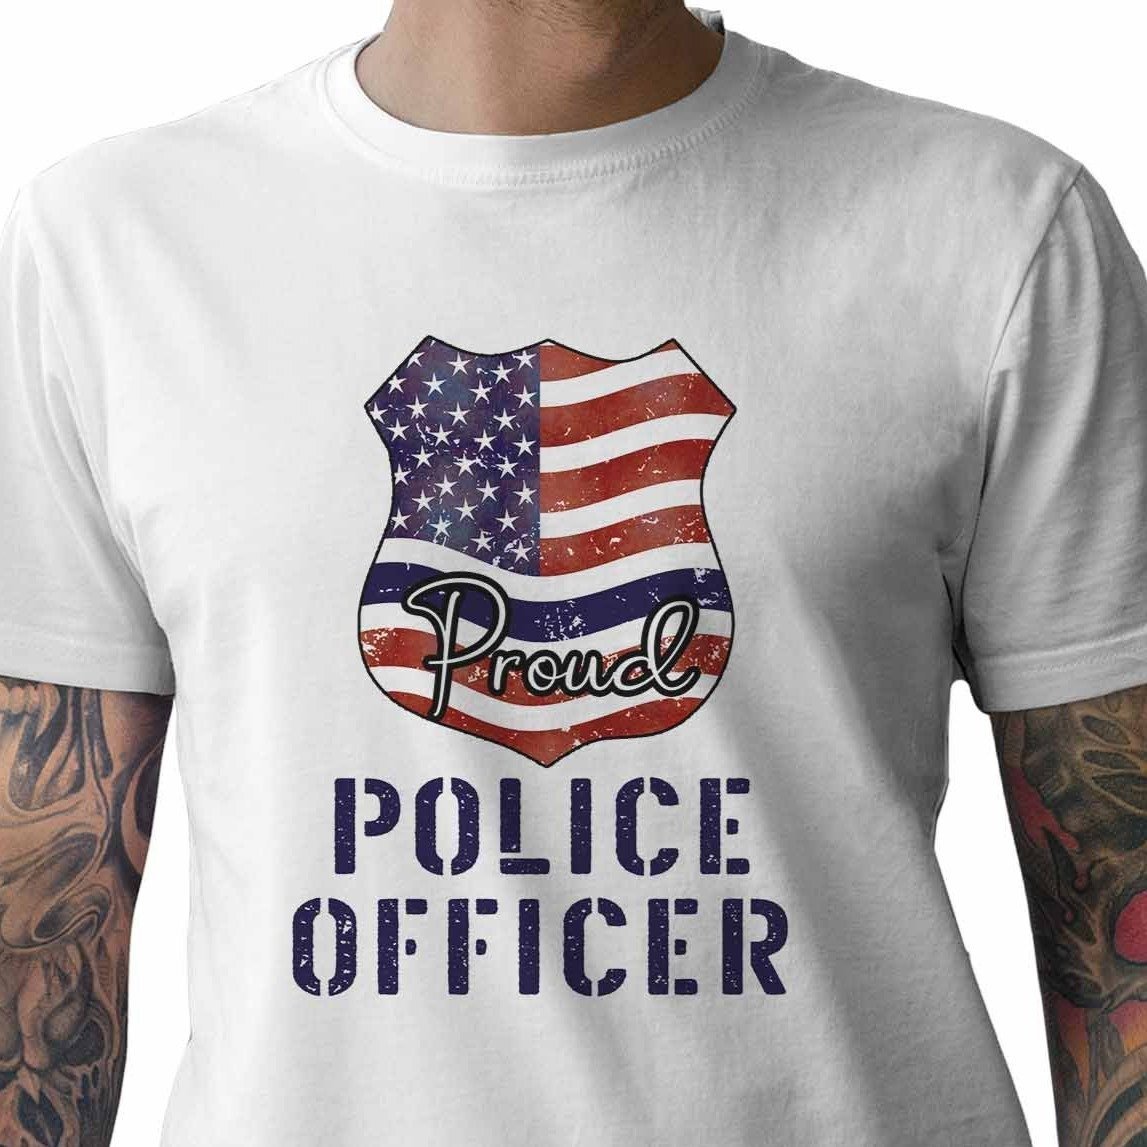 Proud Police Officer - My Custom Tee Party